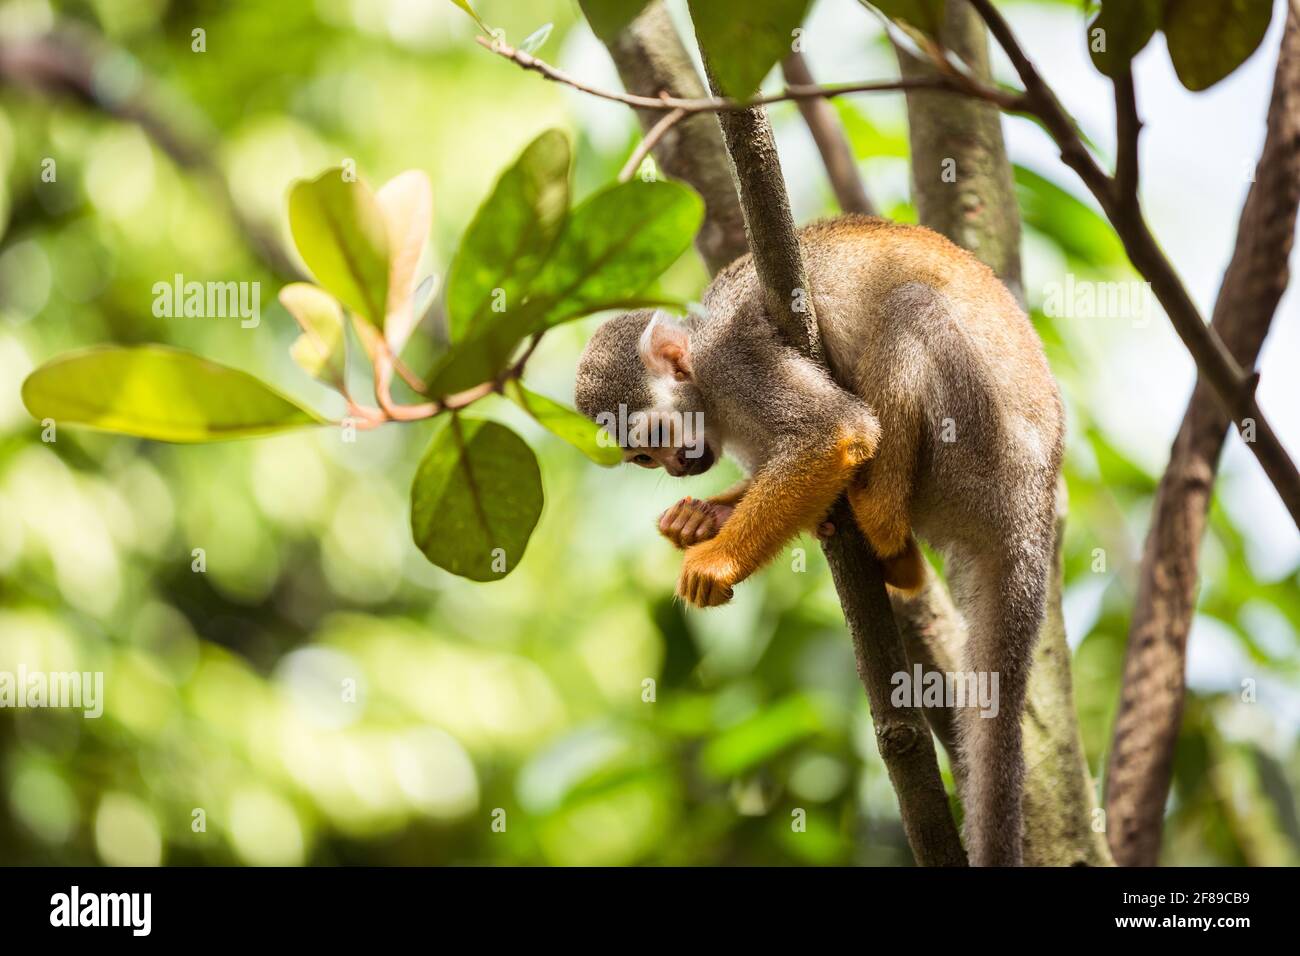 One squirrel monkey on top of a tree looking at its hands. Stock Photo